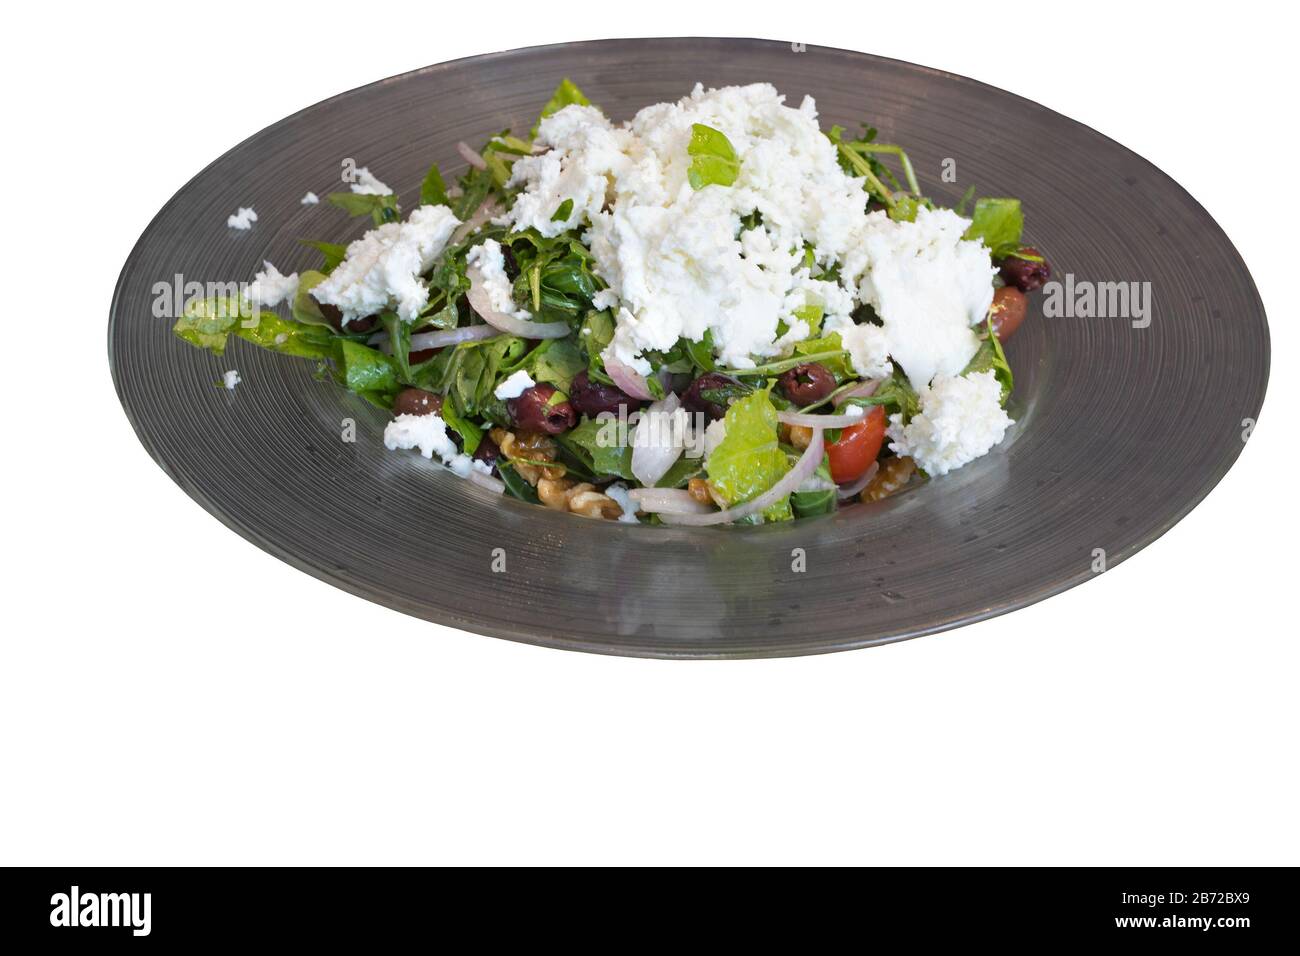 Salad plate with greens, olives, onions, walnuts and tomatoes topped with cheese in a restaurant Stock Photo